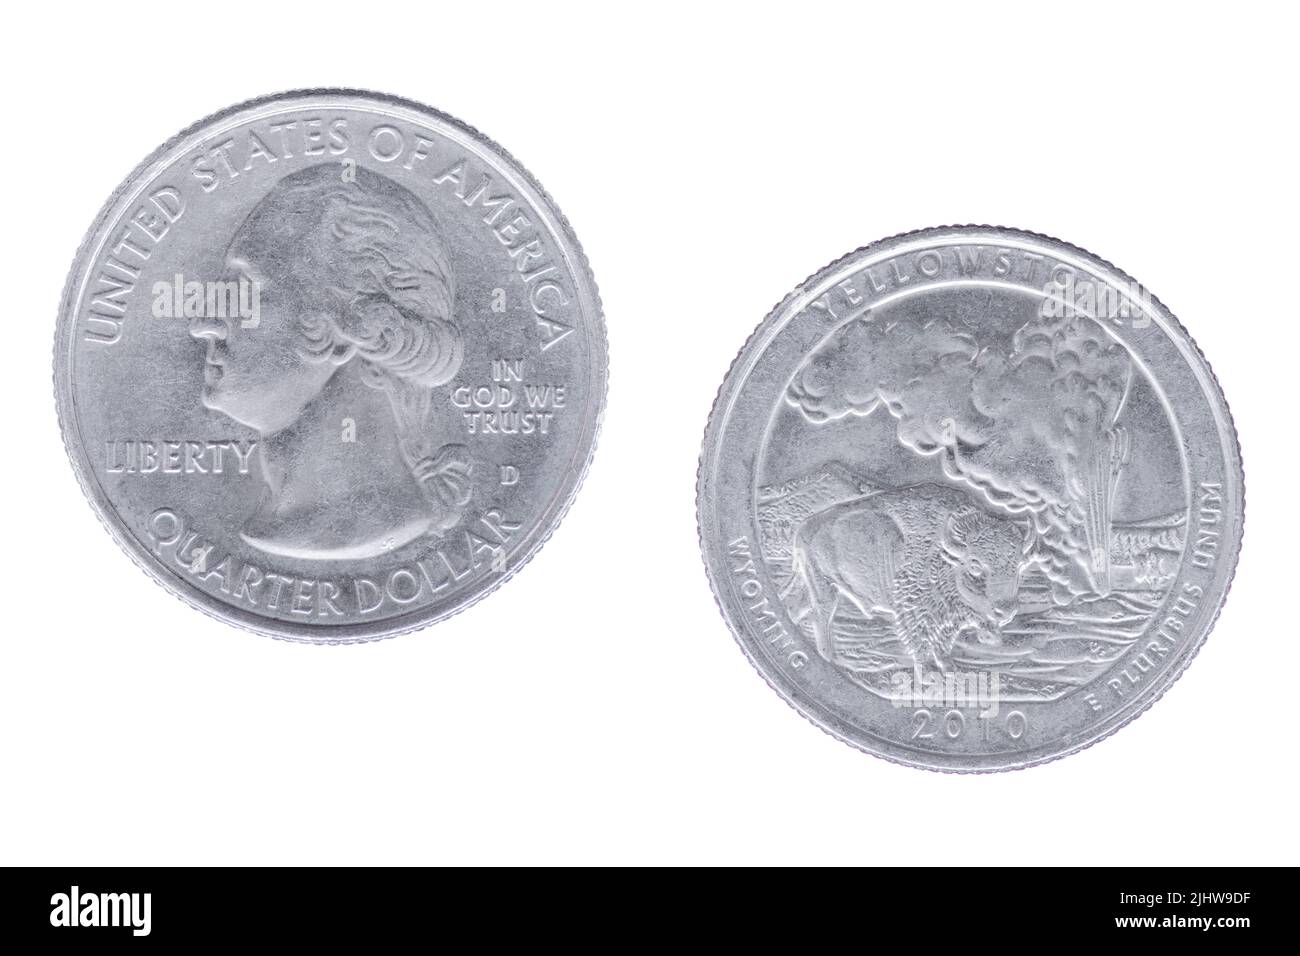 Obverse and reverse sides of the Yellowstone National Park 2010D Commemorative Quarter, part of the America the Beautiful Commemorative Quarters Stock Photo